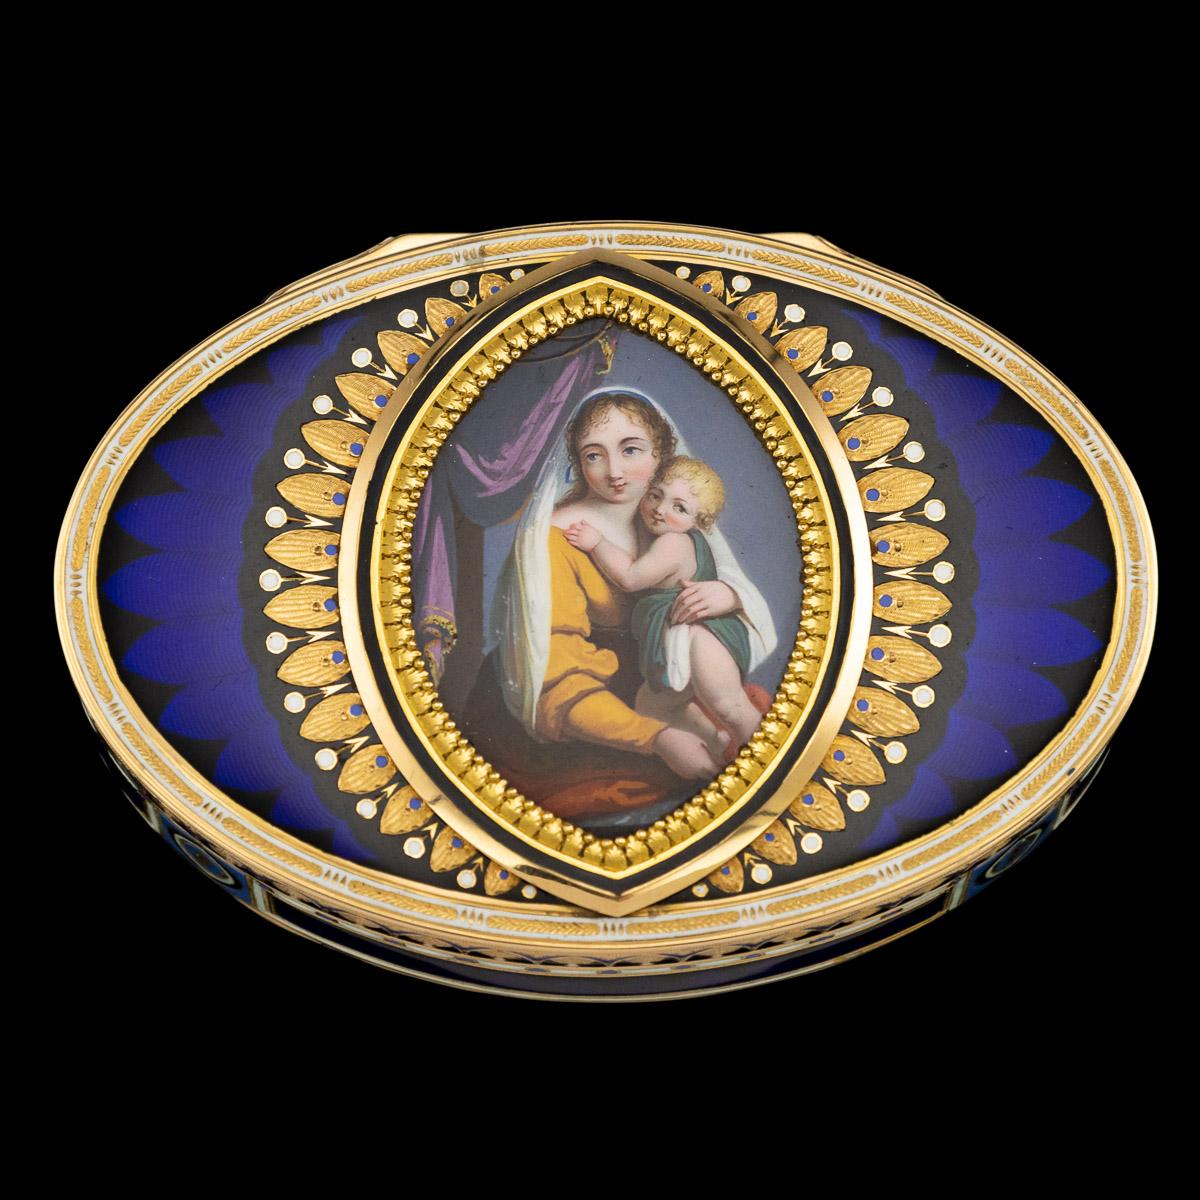 Antique early 19th century Swiss 18-karat gold snuff box, the lid set with a marquise shaped panel delicately hand painted depicting holly mother and child surrounded by an engraved laurel leaf boarder and a large boarder with ovals and arrows,